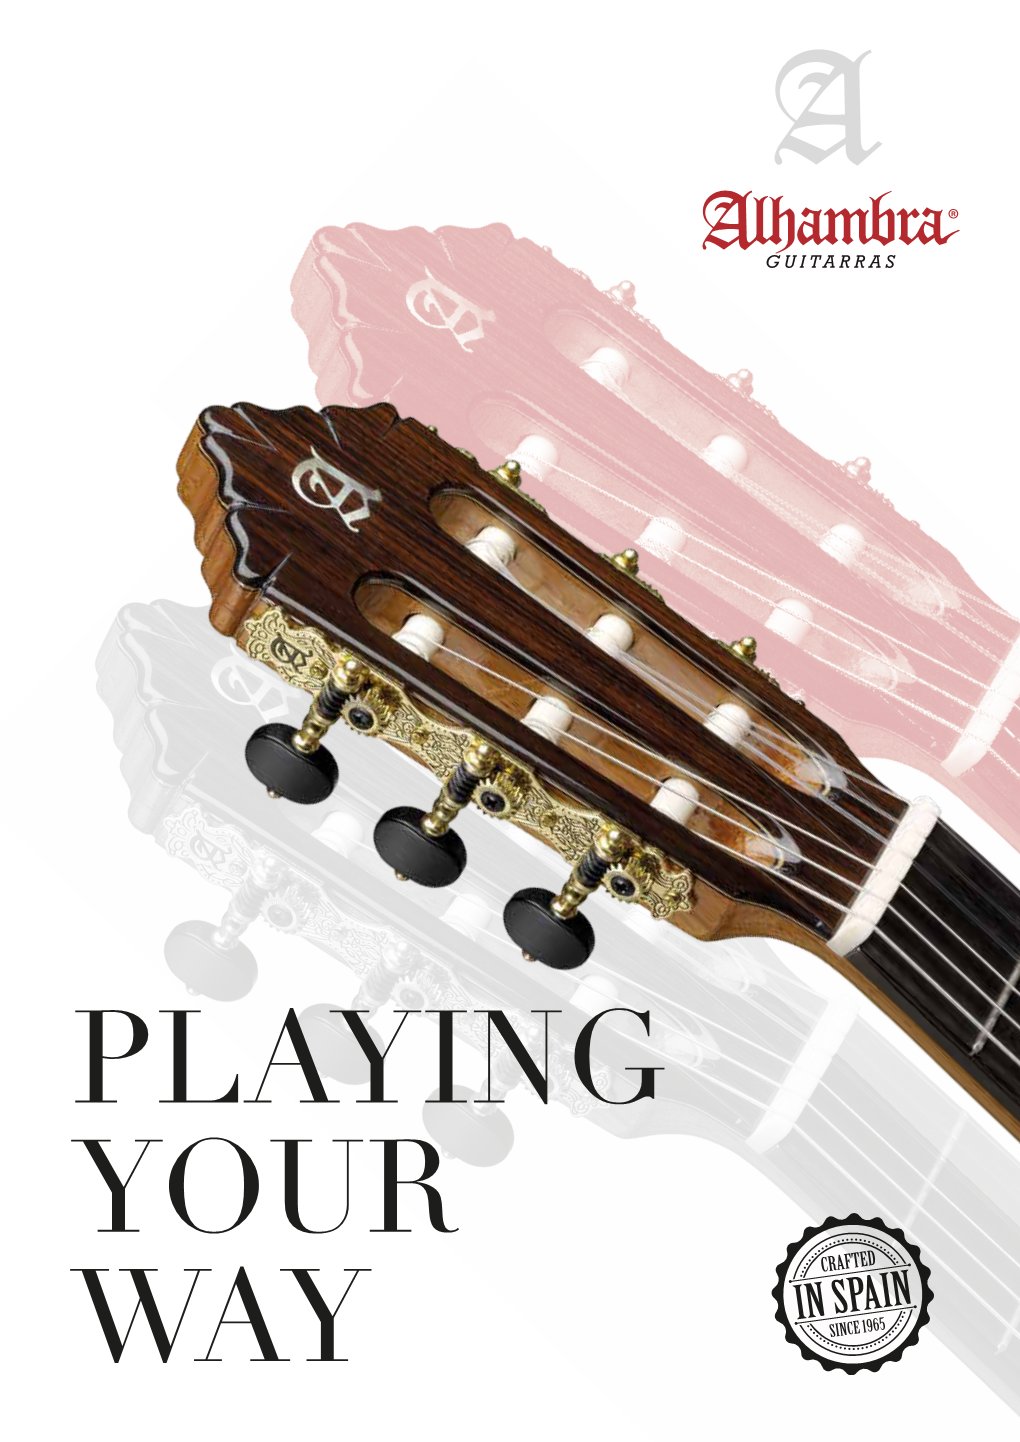 12 Reasons to Choose an Alhambra Guitar